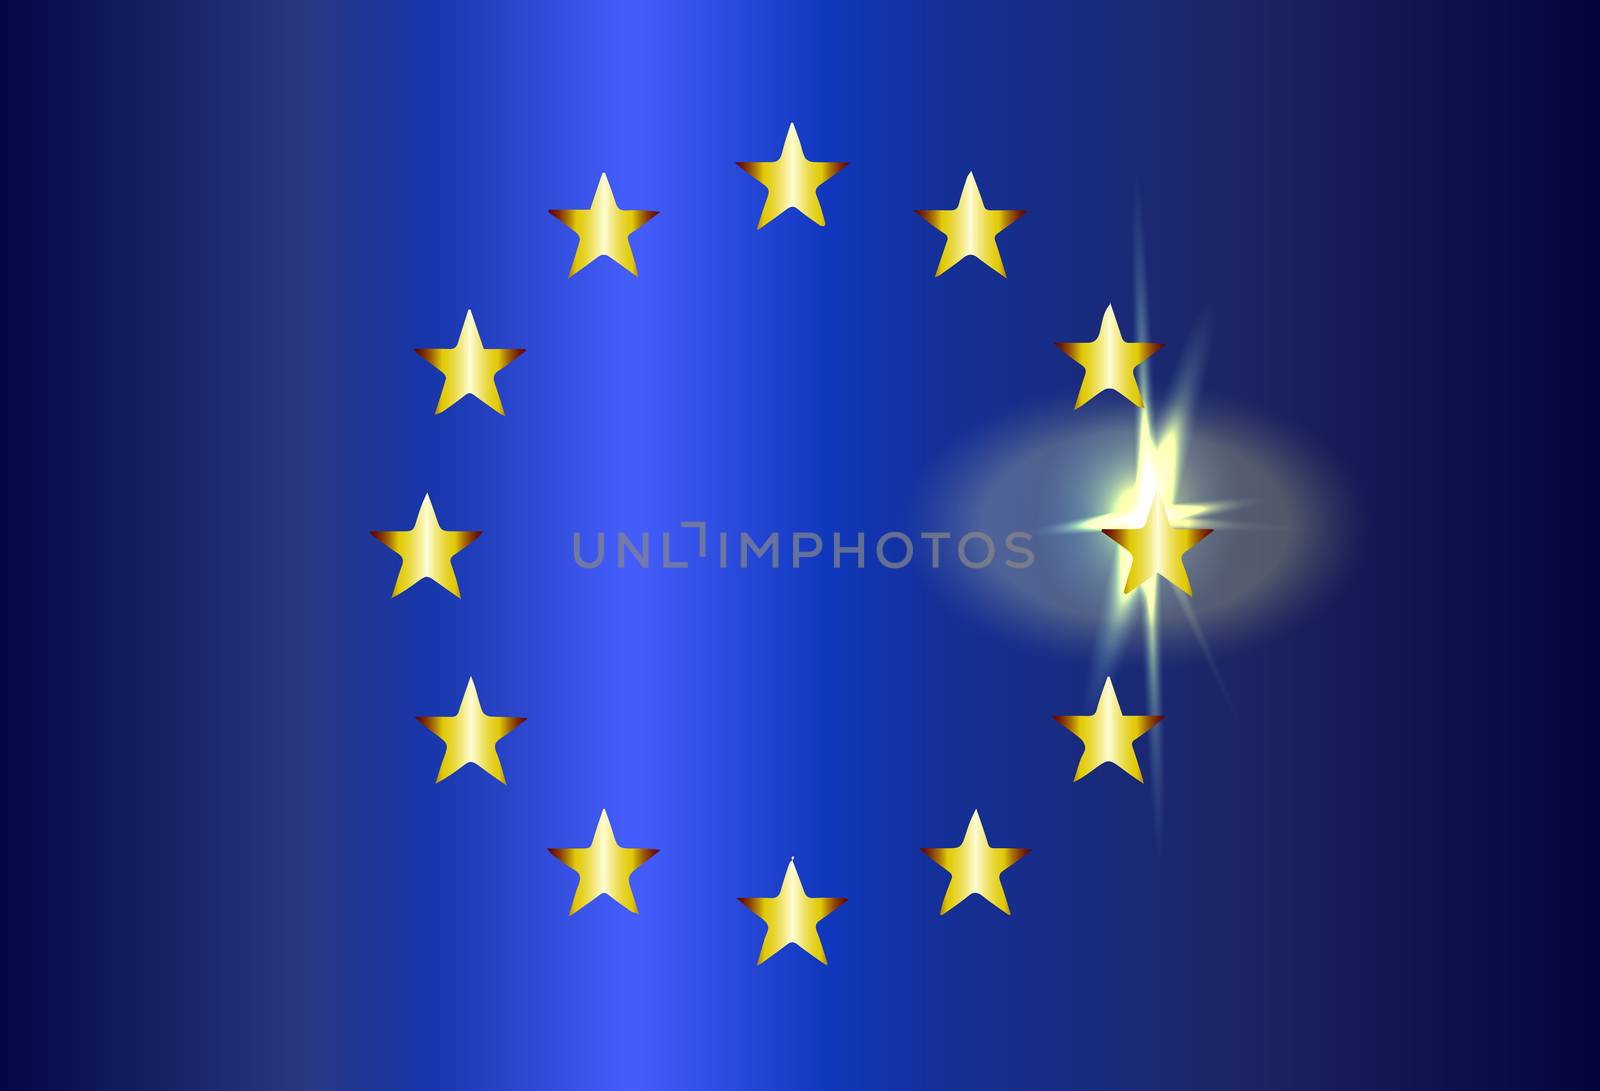 Flag of the European Union with blue background and yellow stars with grunge effect